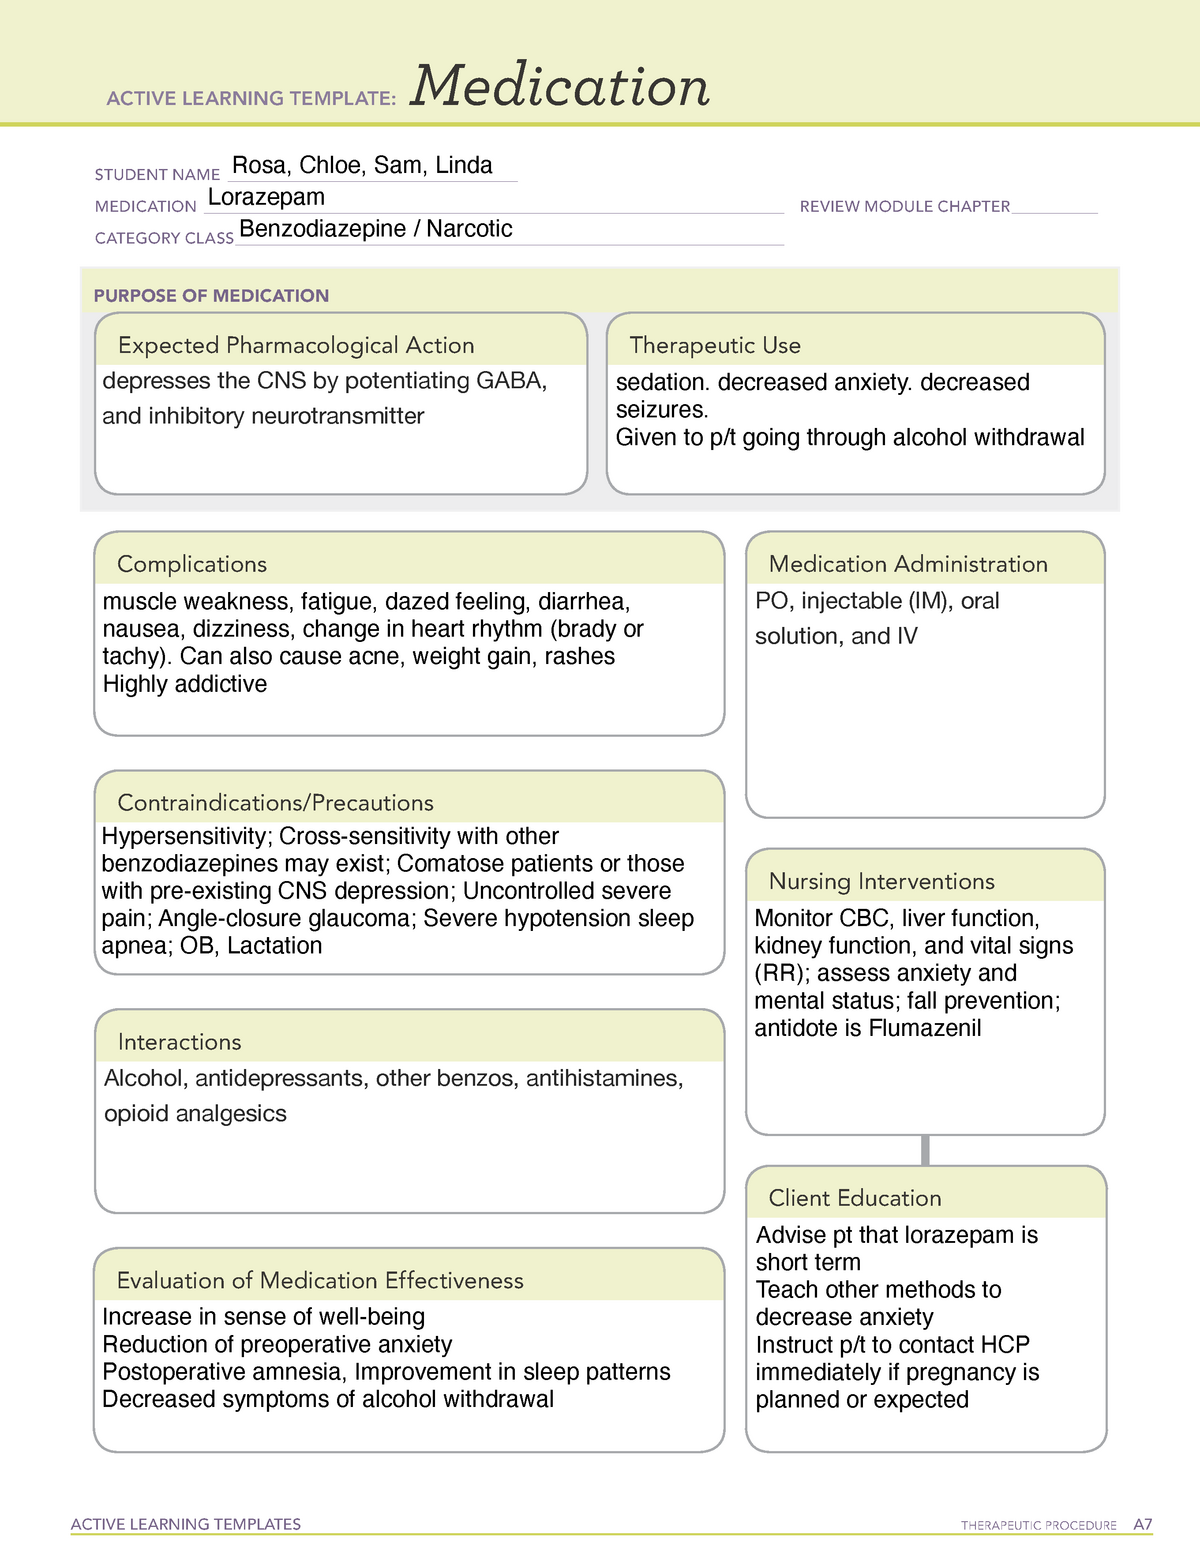 ati-medication-lorazepam-active-learning-templates-therapeutic